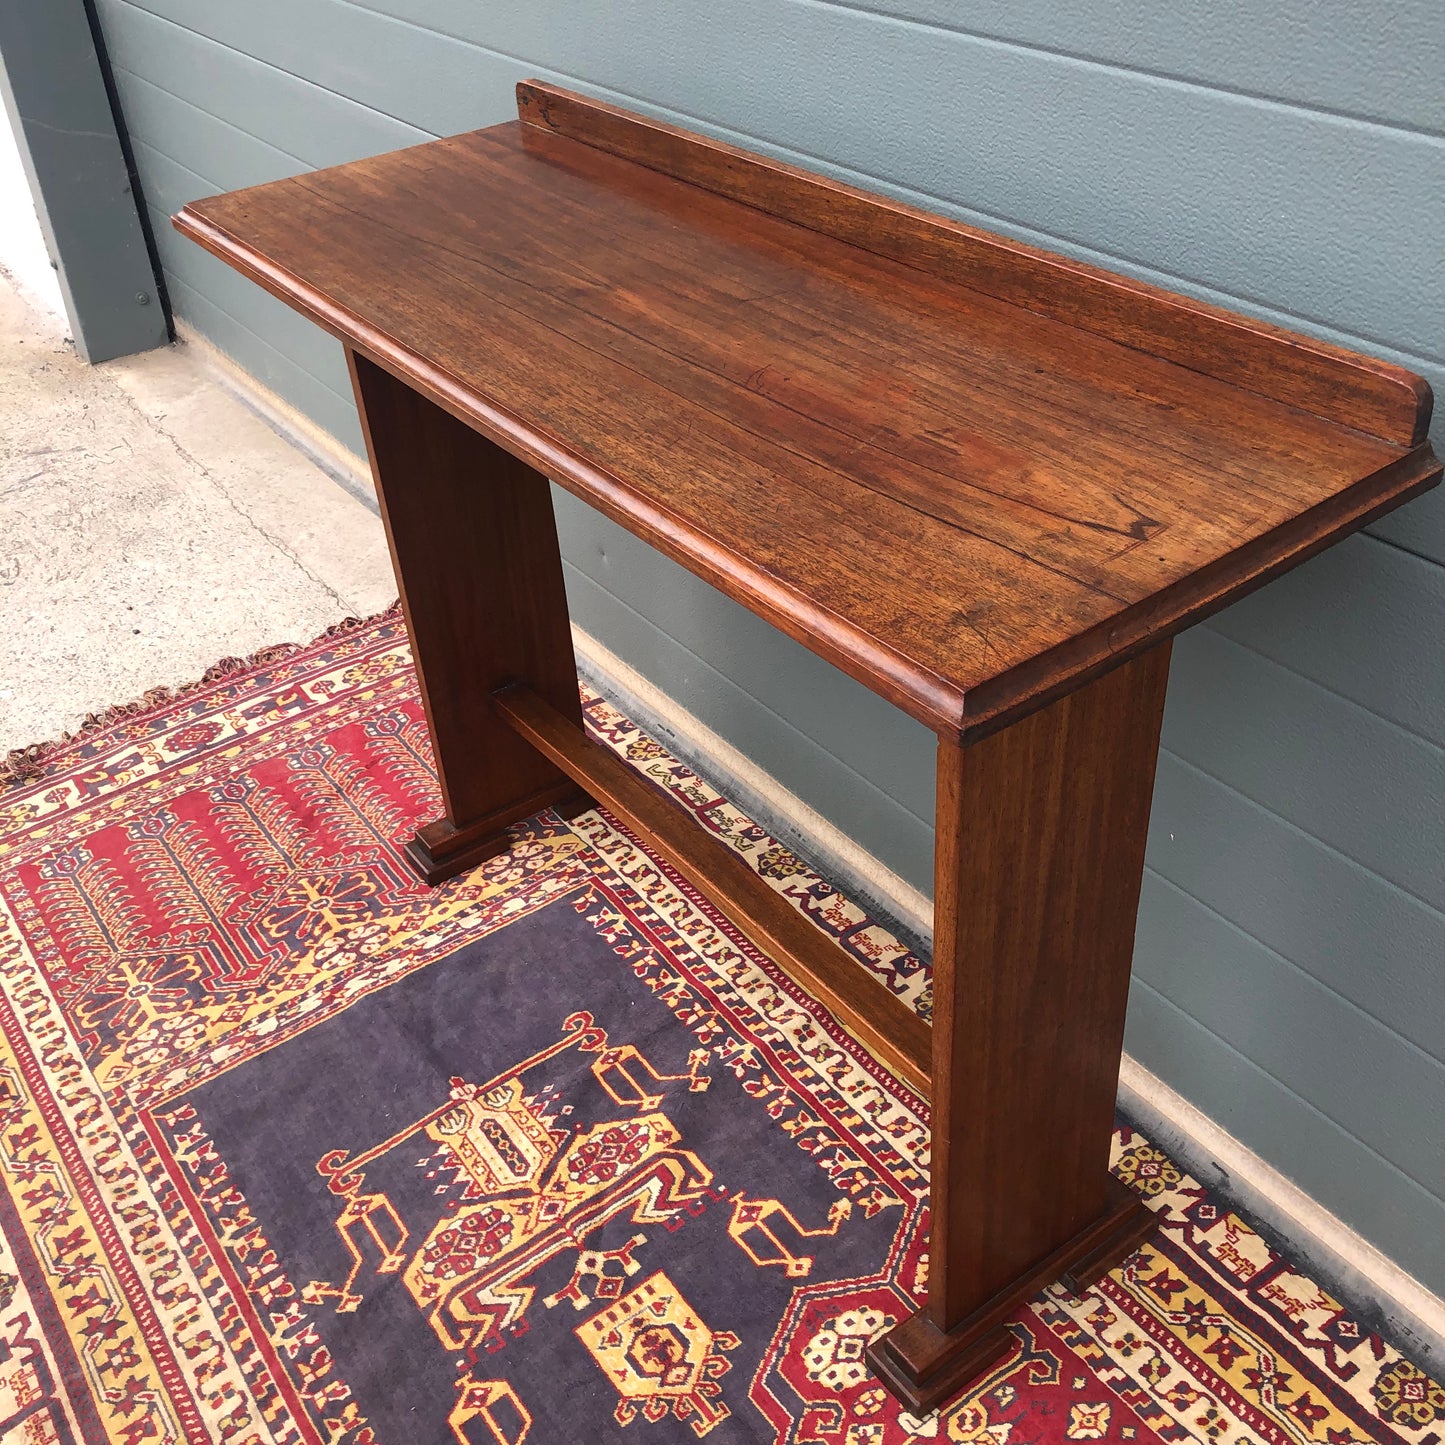 Vintage Arts And Crafts Style Hall Table / Gothic Style Side Table ( SOLD )